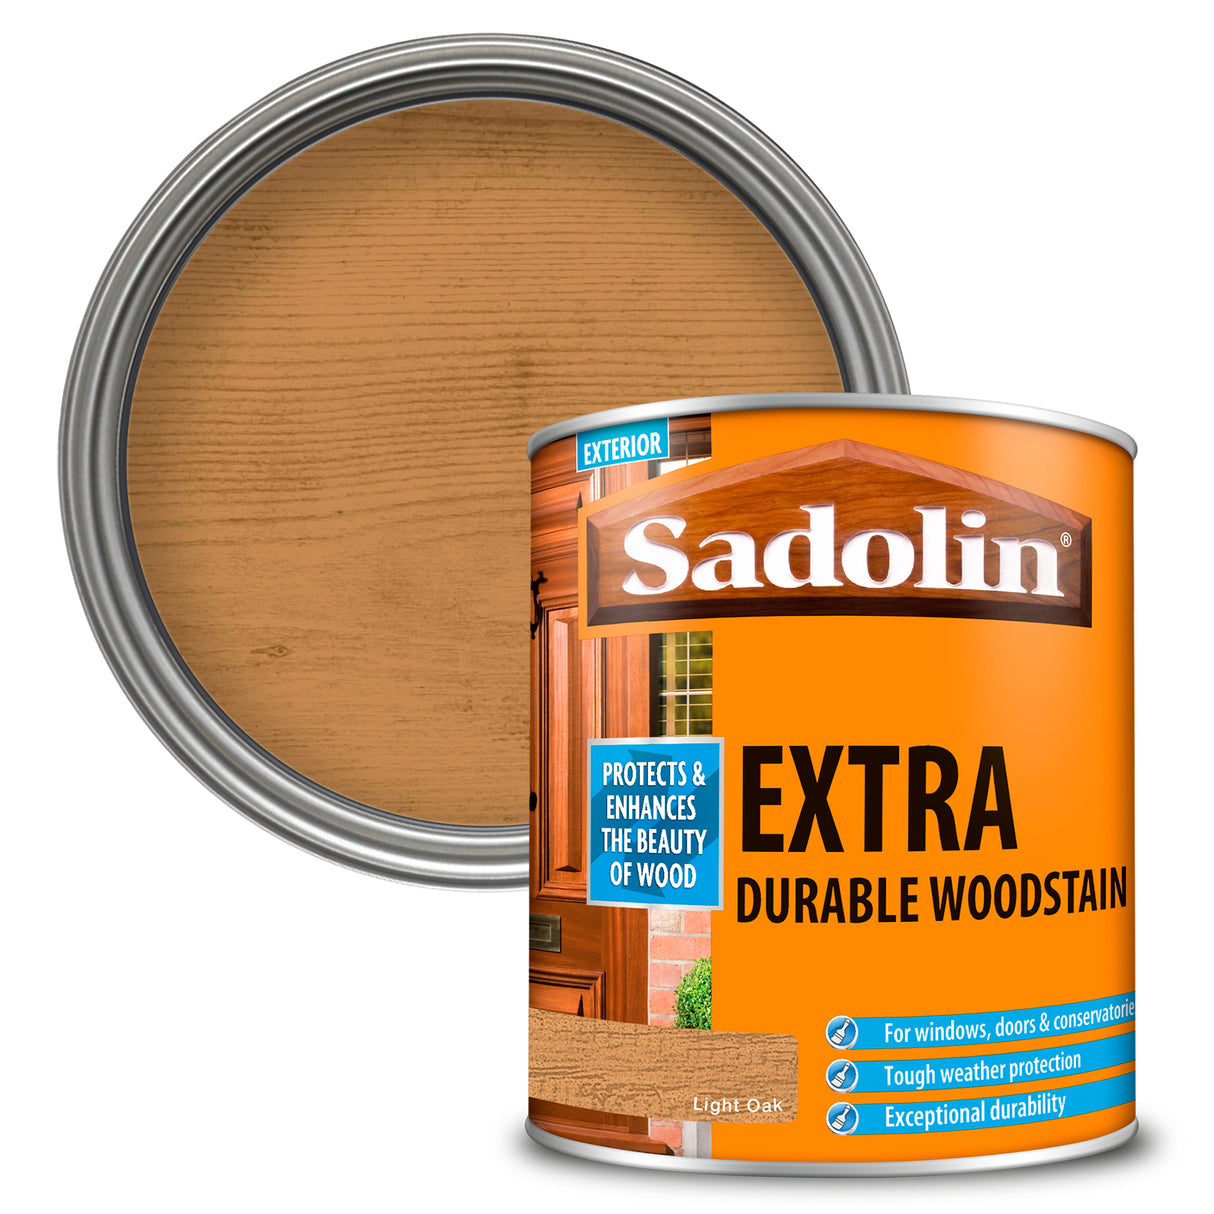 Sadolin Extra Durable Woodstain